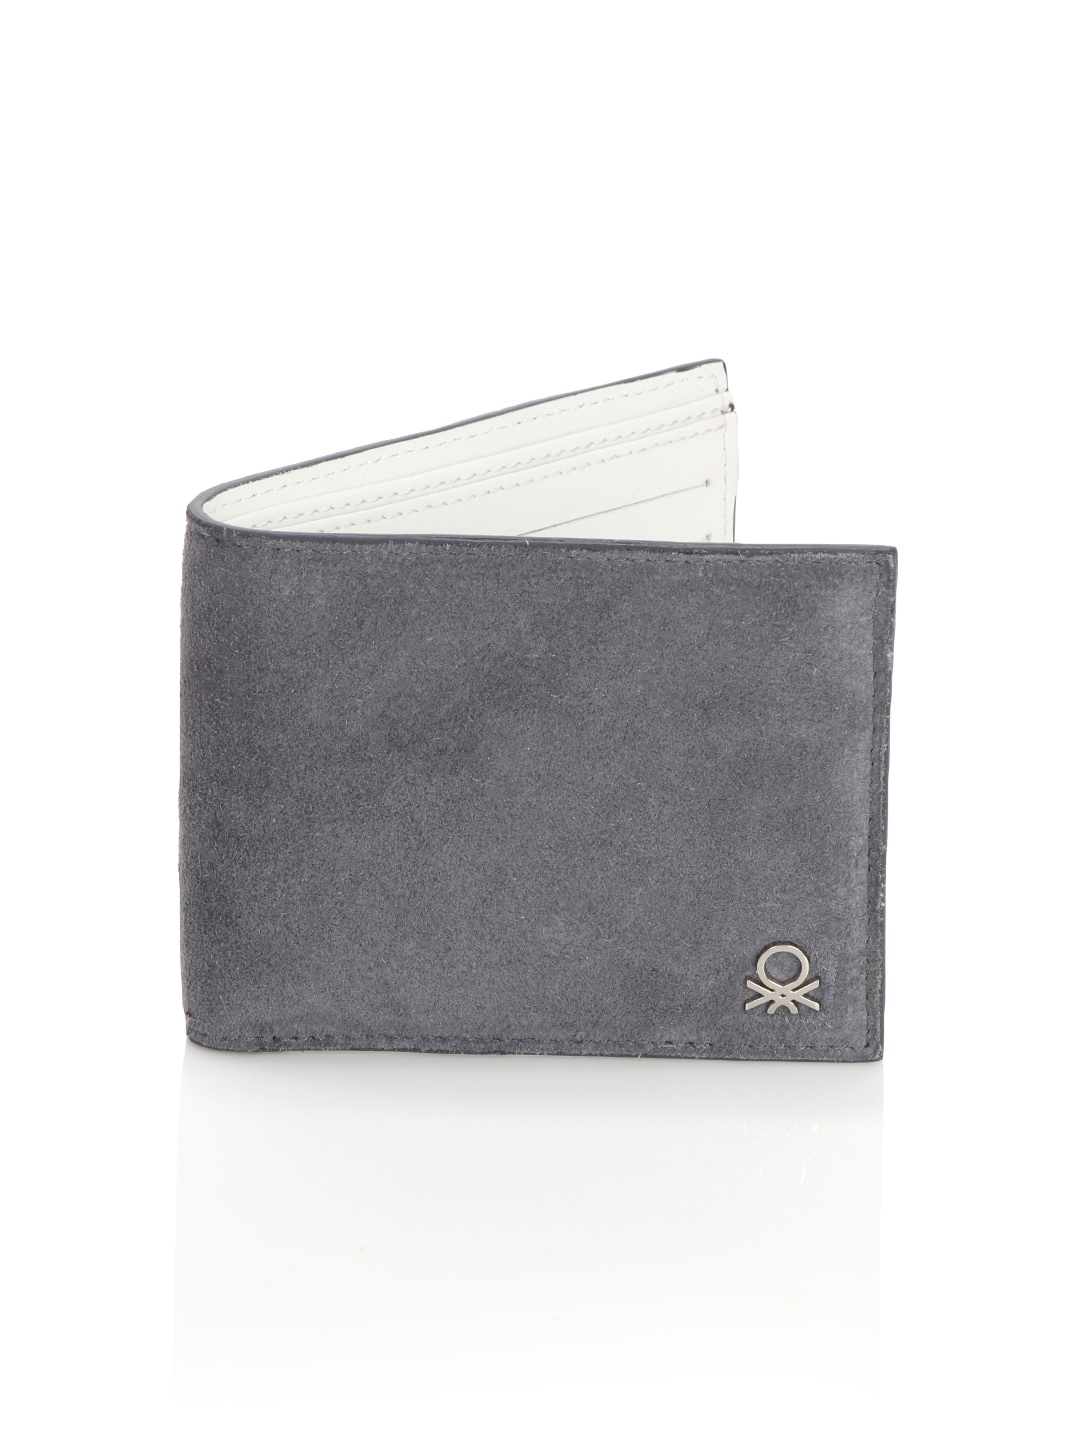 United Colors of Benetton Men Leather Grey Wallet